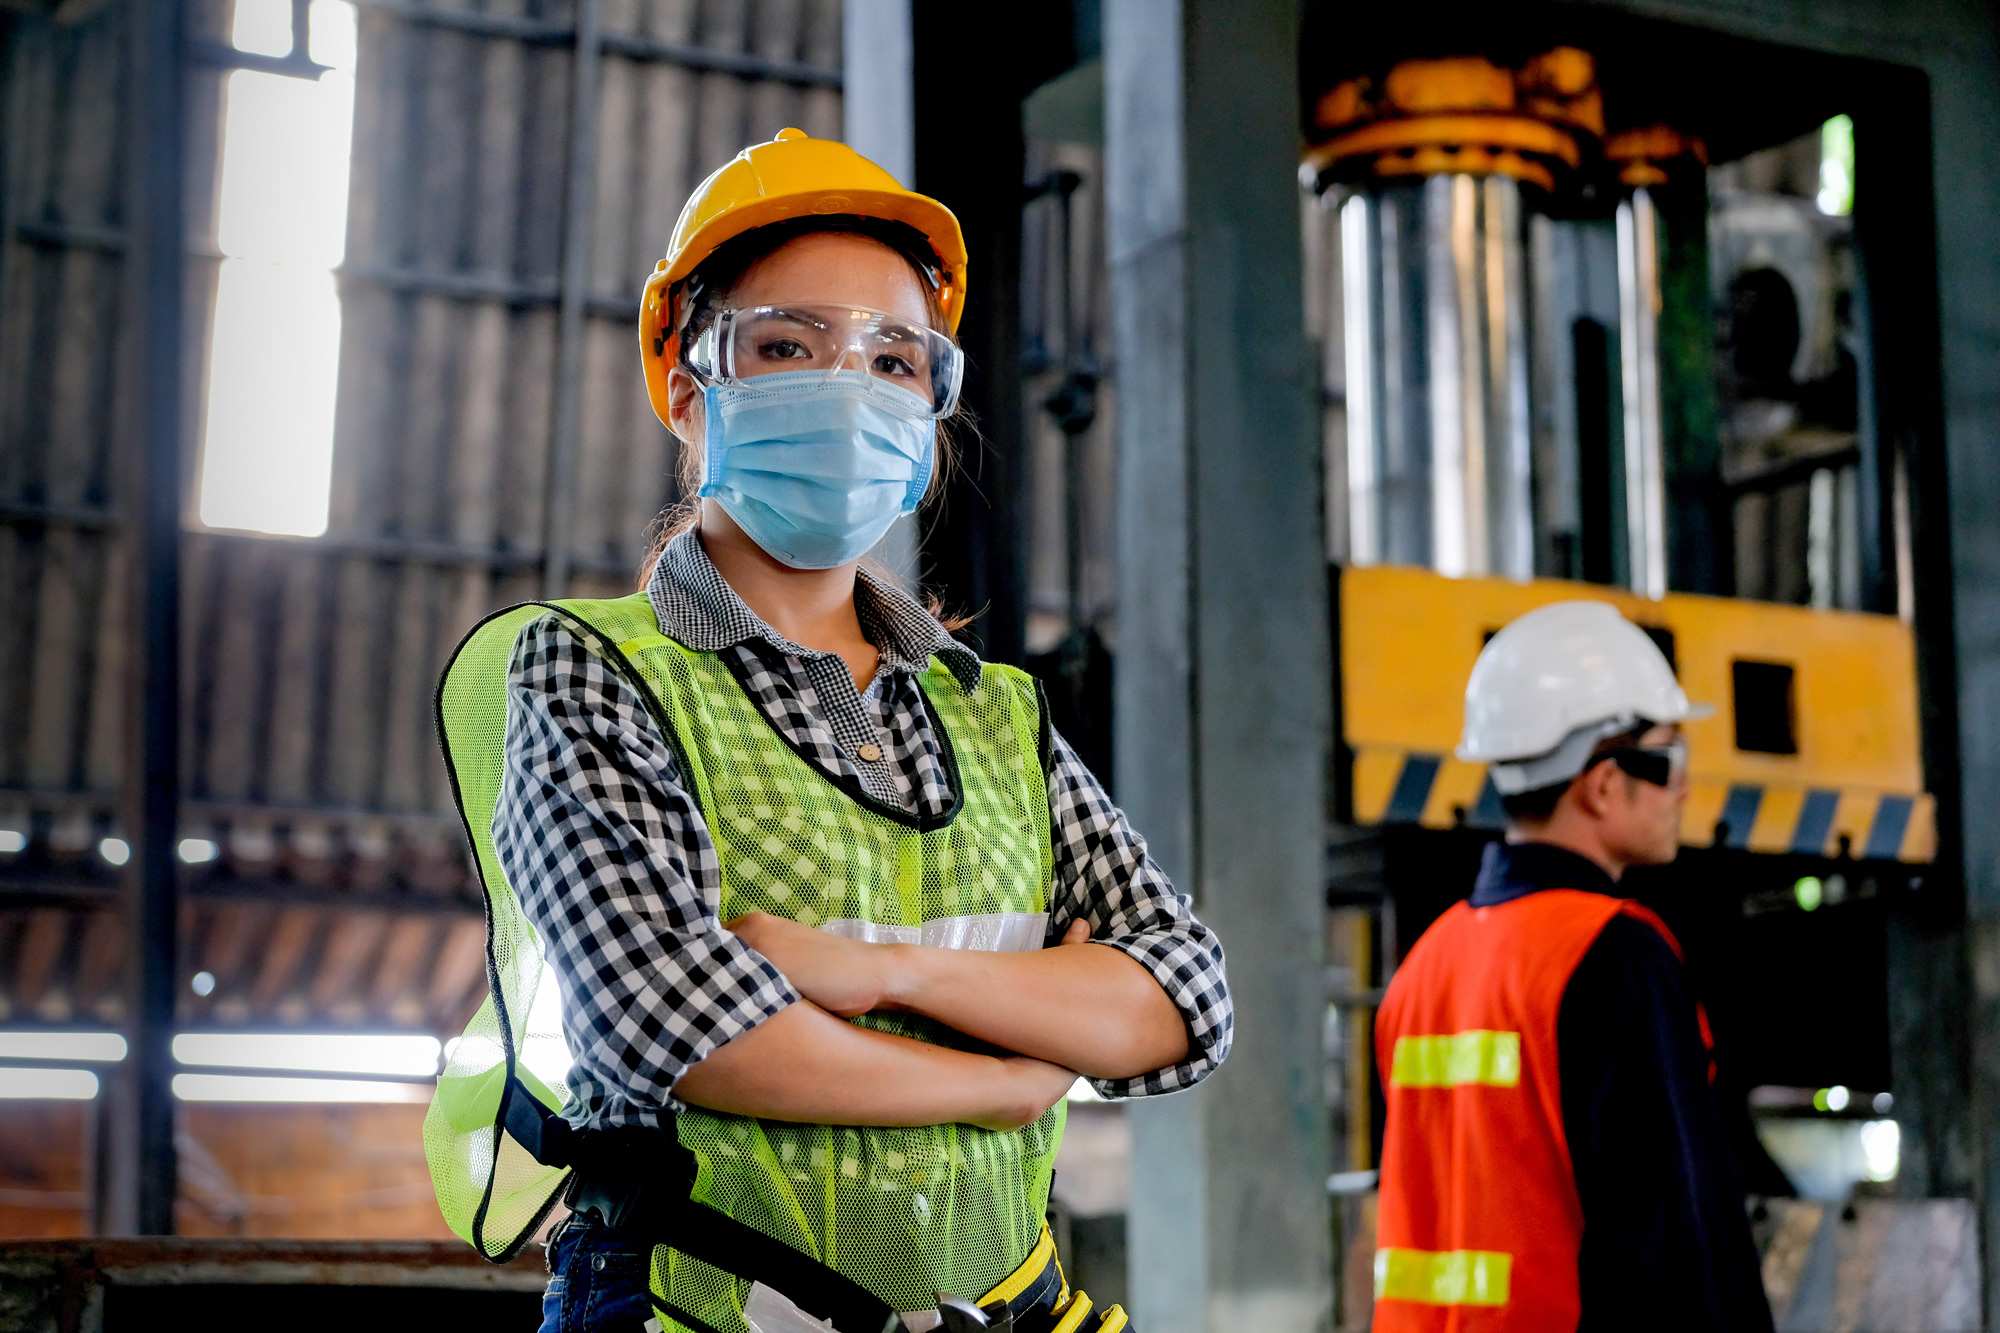 People in factory wearing protective gear